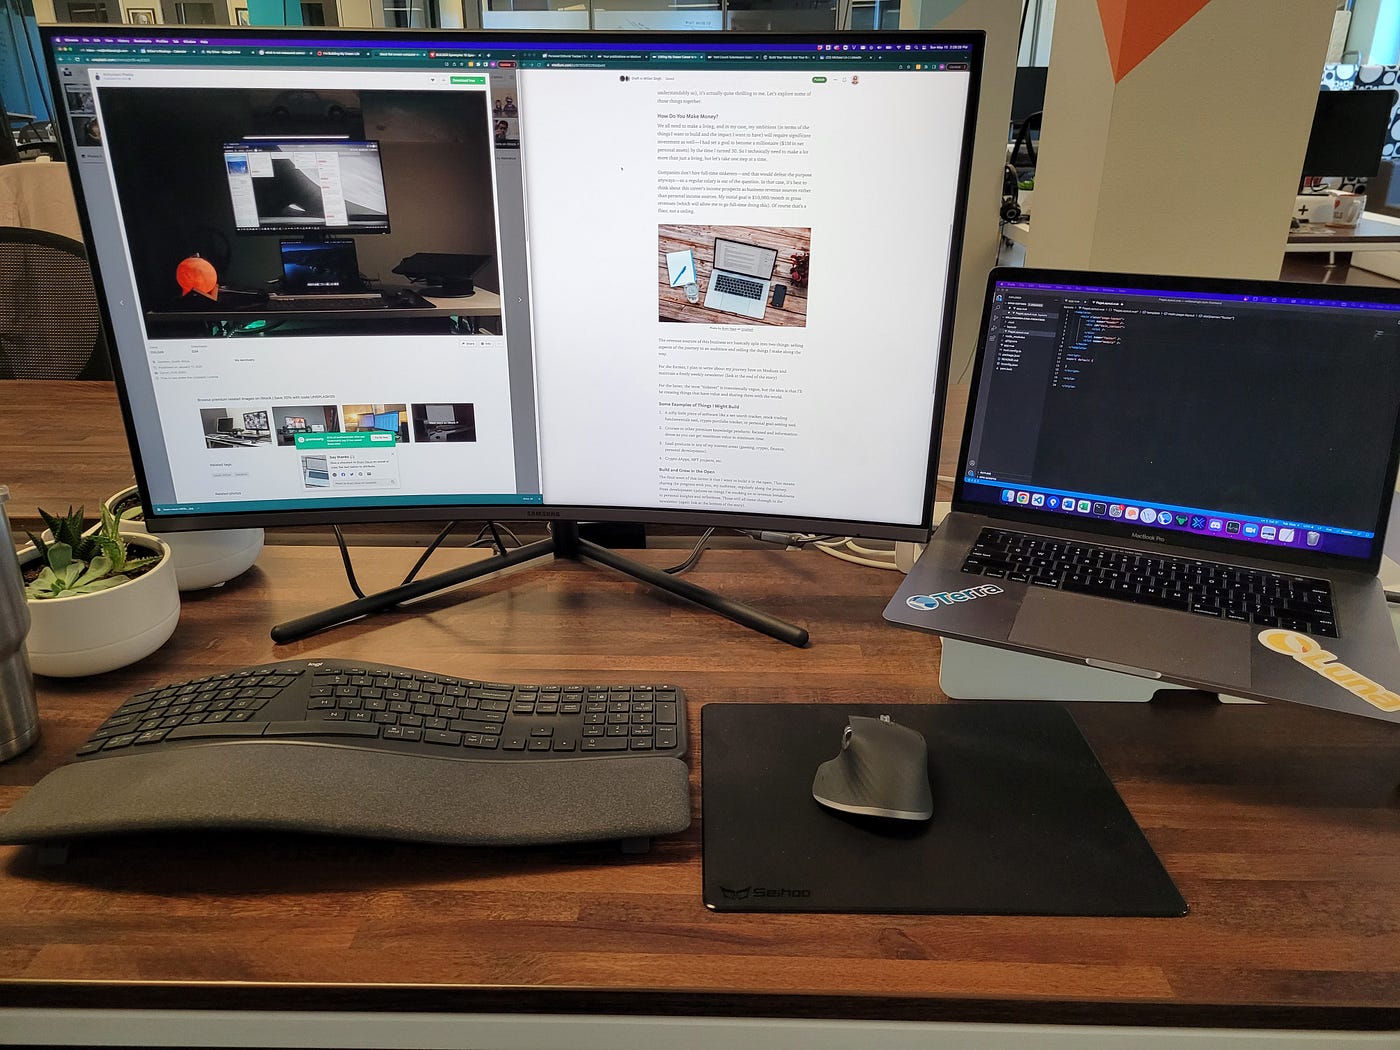 Large monitor next to a Macbook Pro laptop with a keyboard and mouse setup.